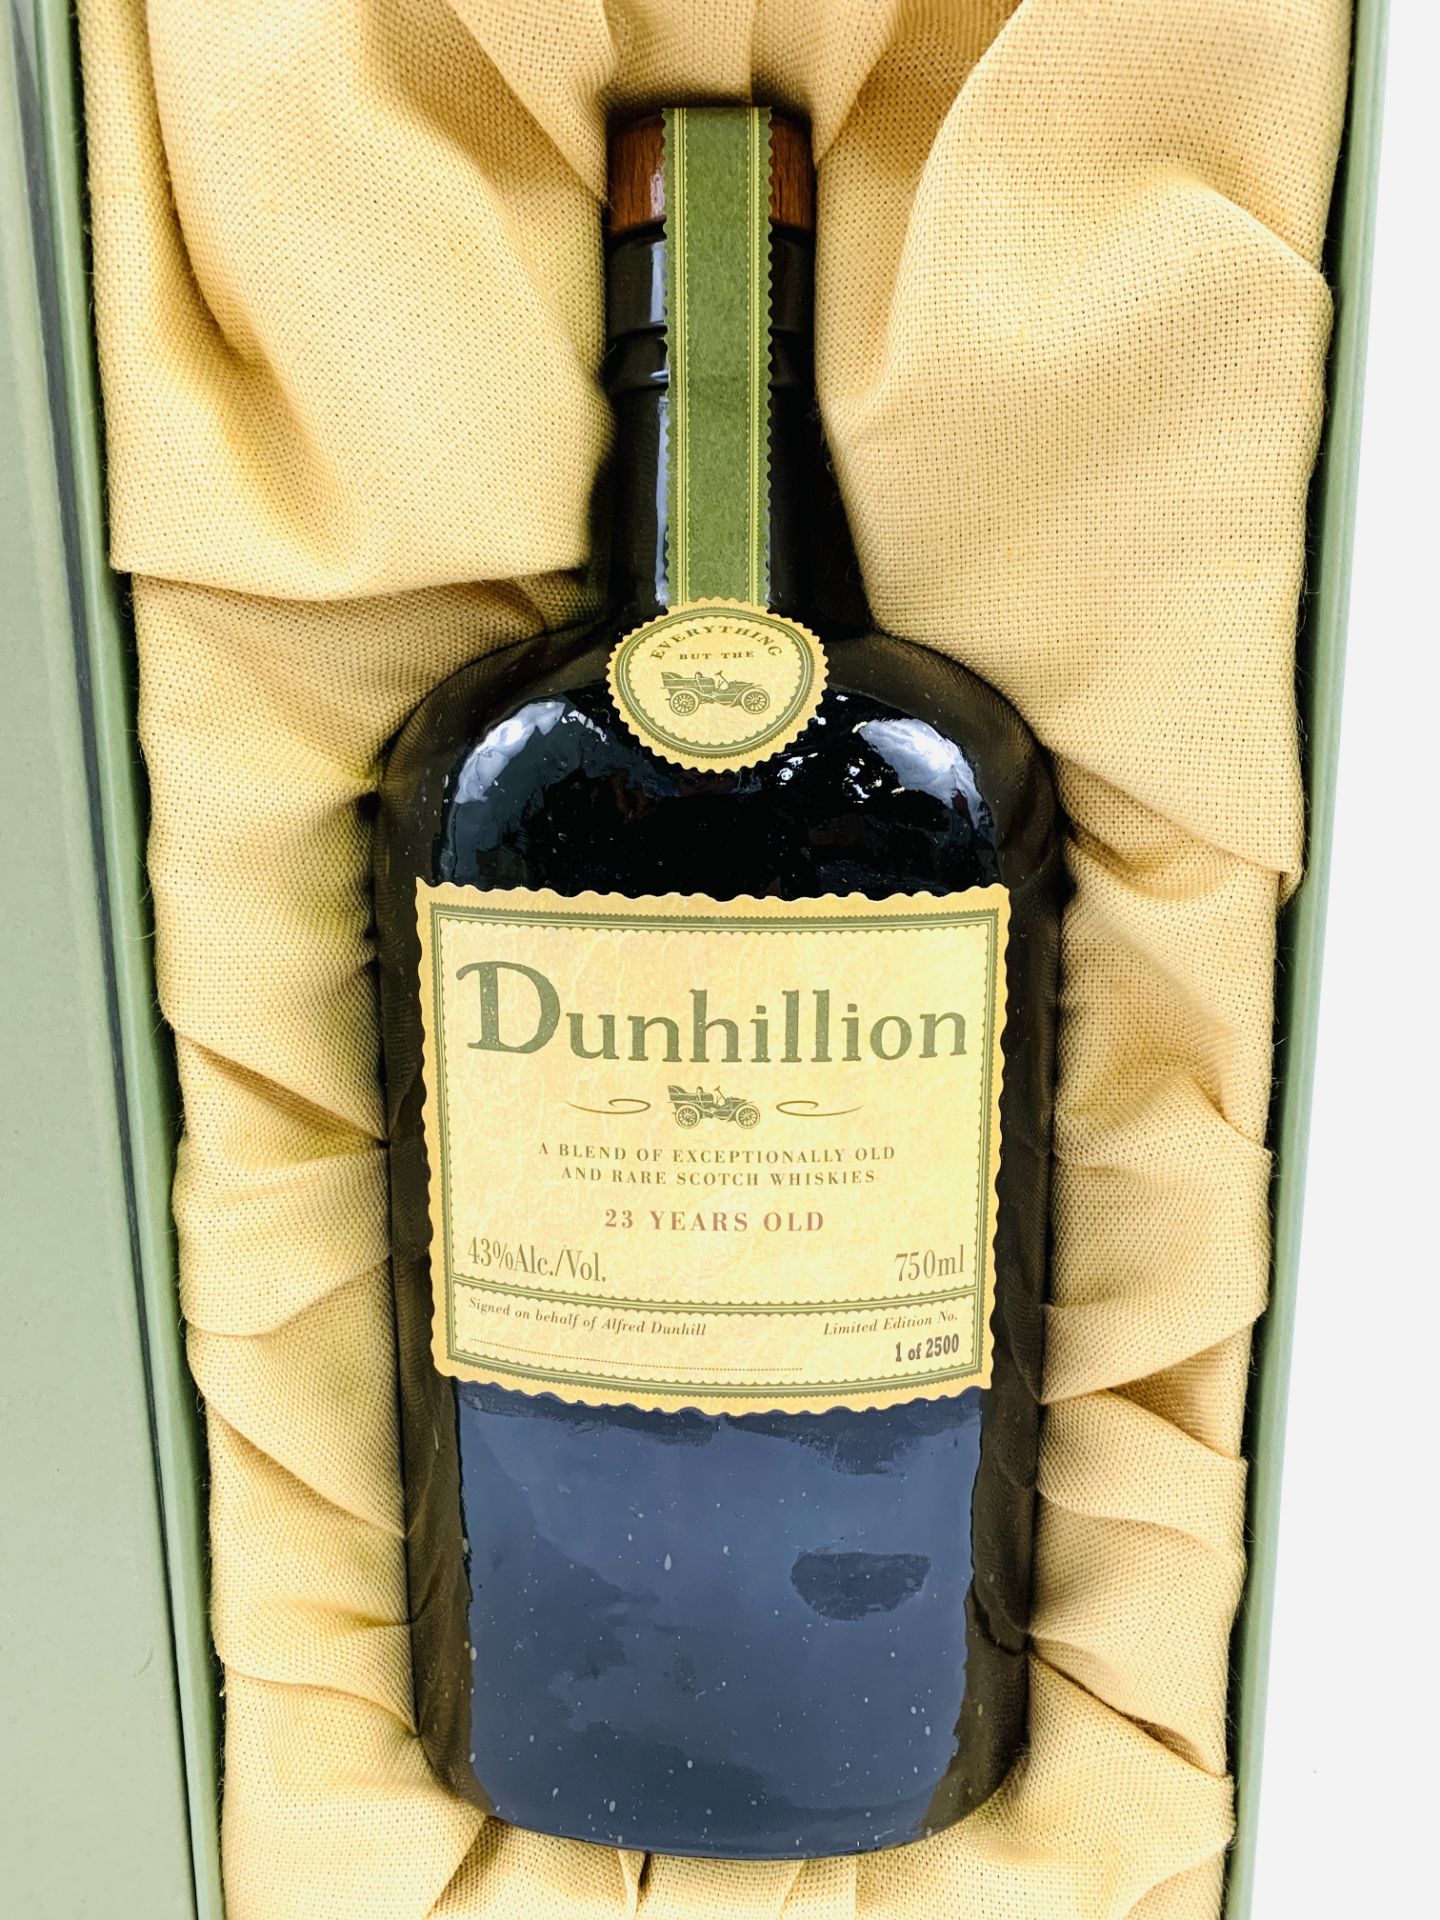 750ml bottle of Dunhillion 23 year old blended Scotch Whisky, limited edition, in original box - Image 2 of 2